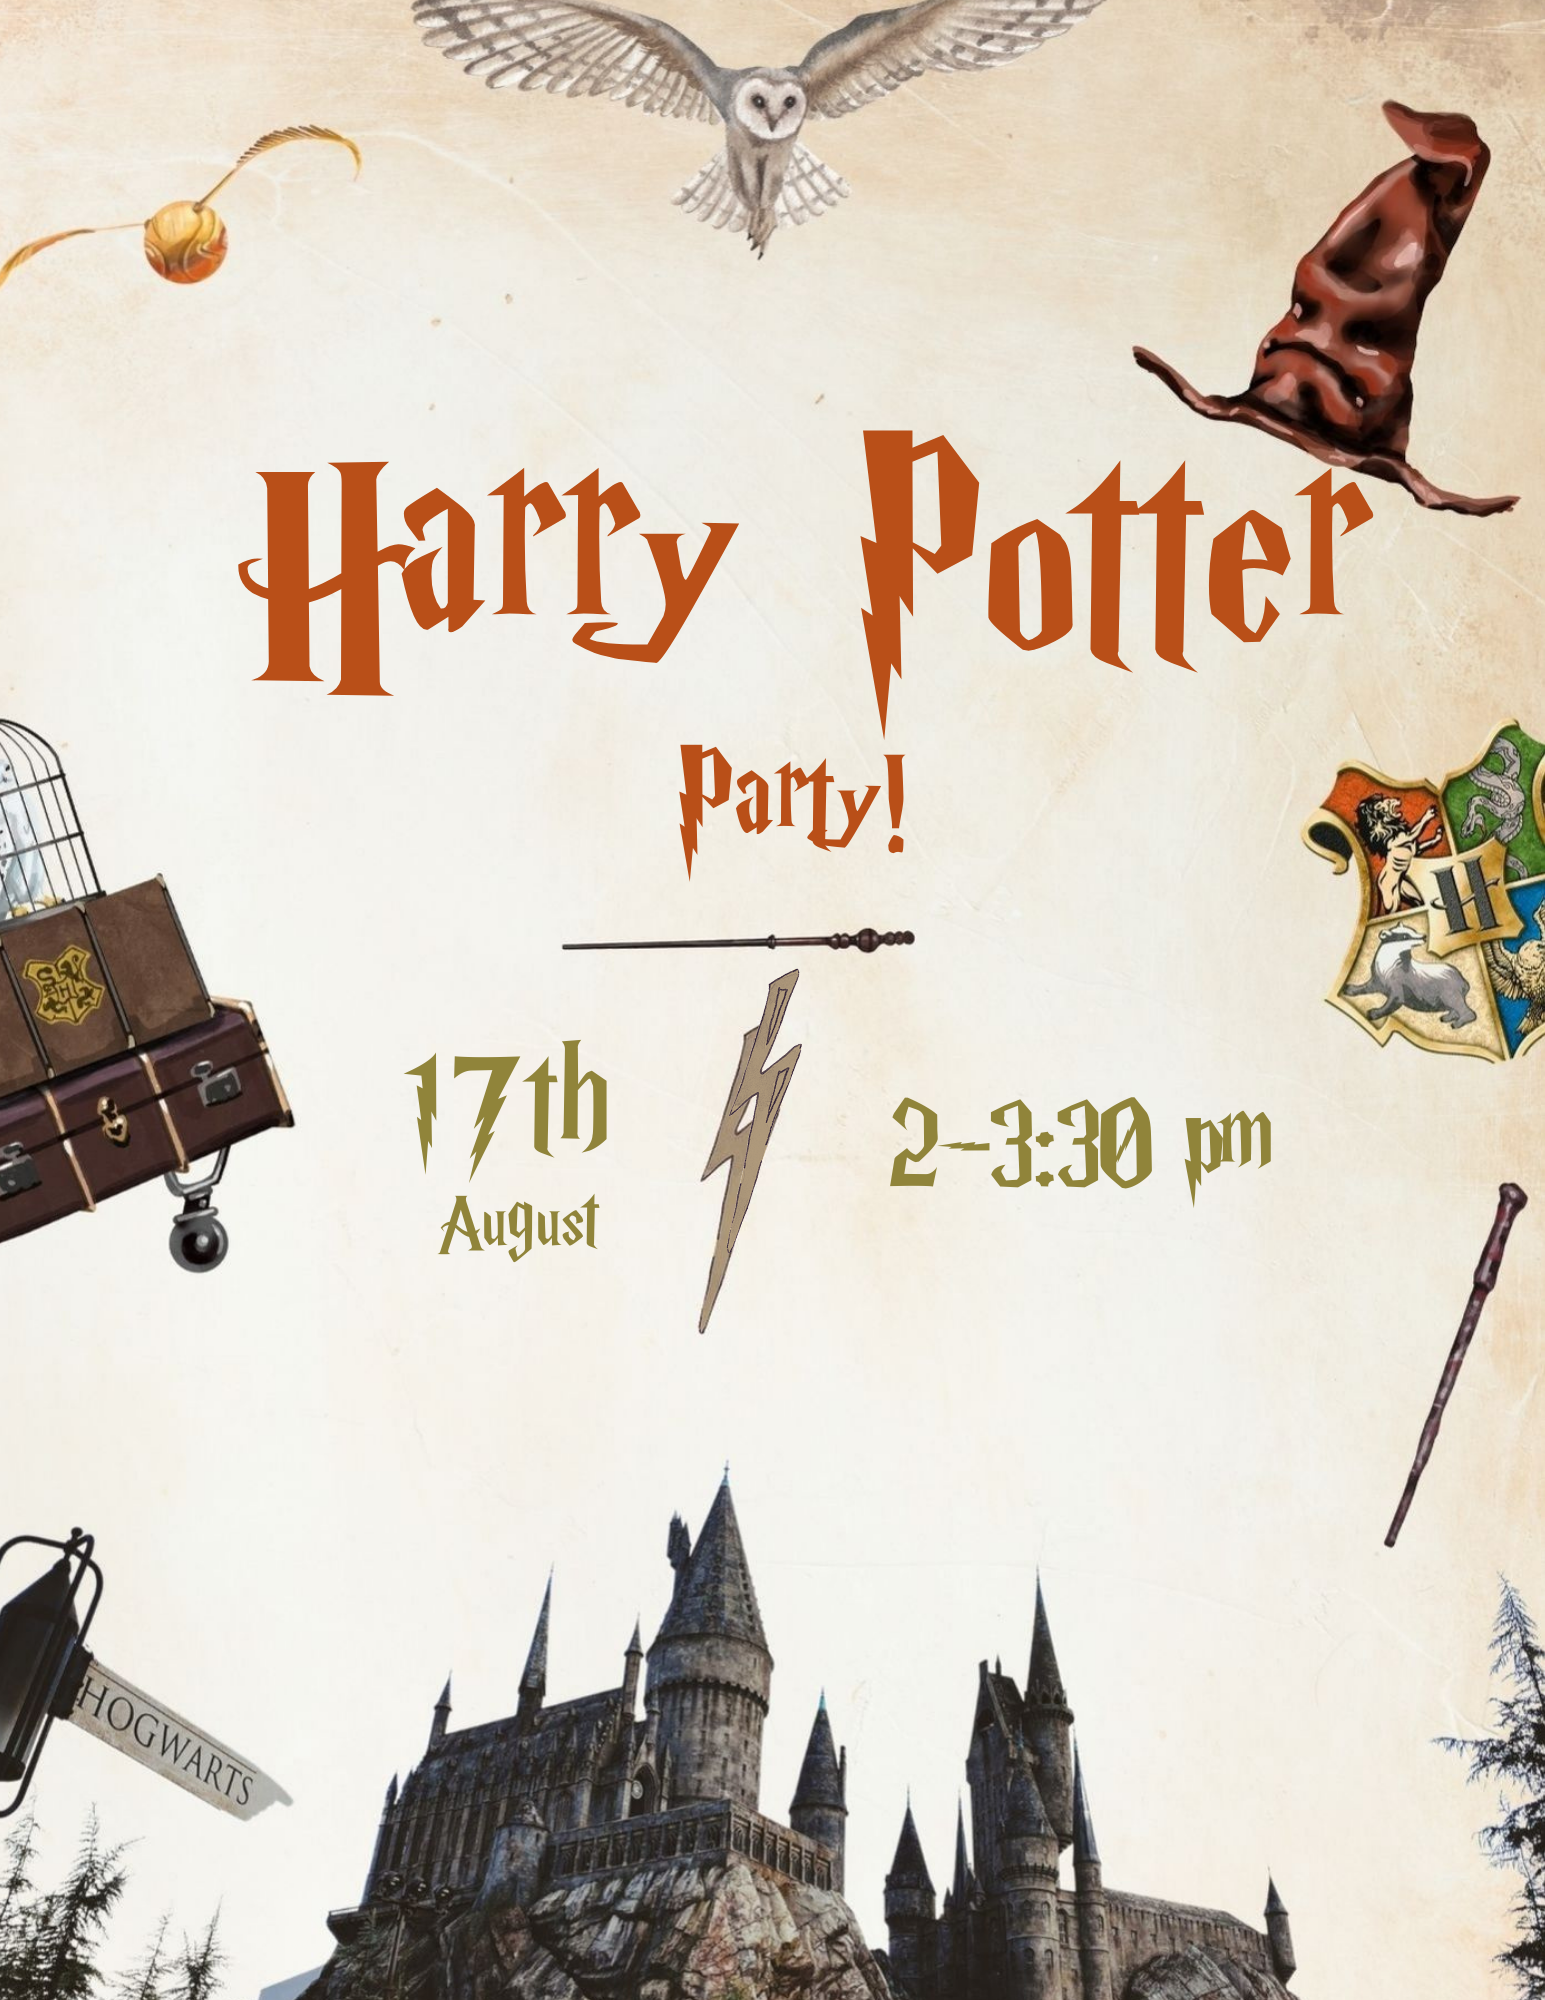 Harry potter party flyer